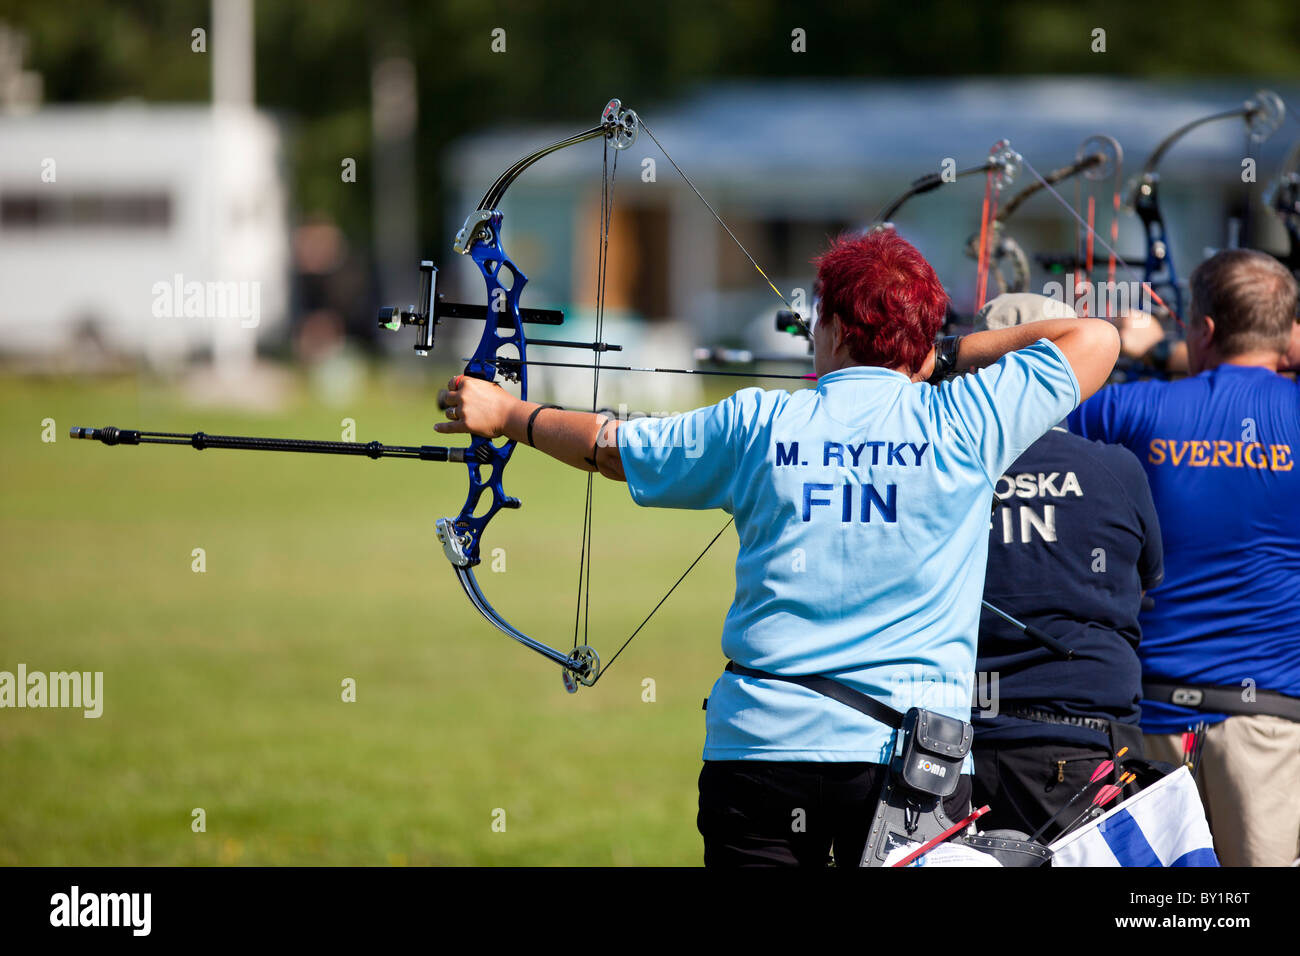 Archers ready to shoot in an international competition between the Cap of the North countries ( Finland, Sweden, Norway ) , Finland Stock Photo